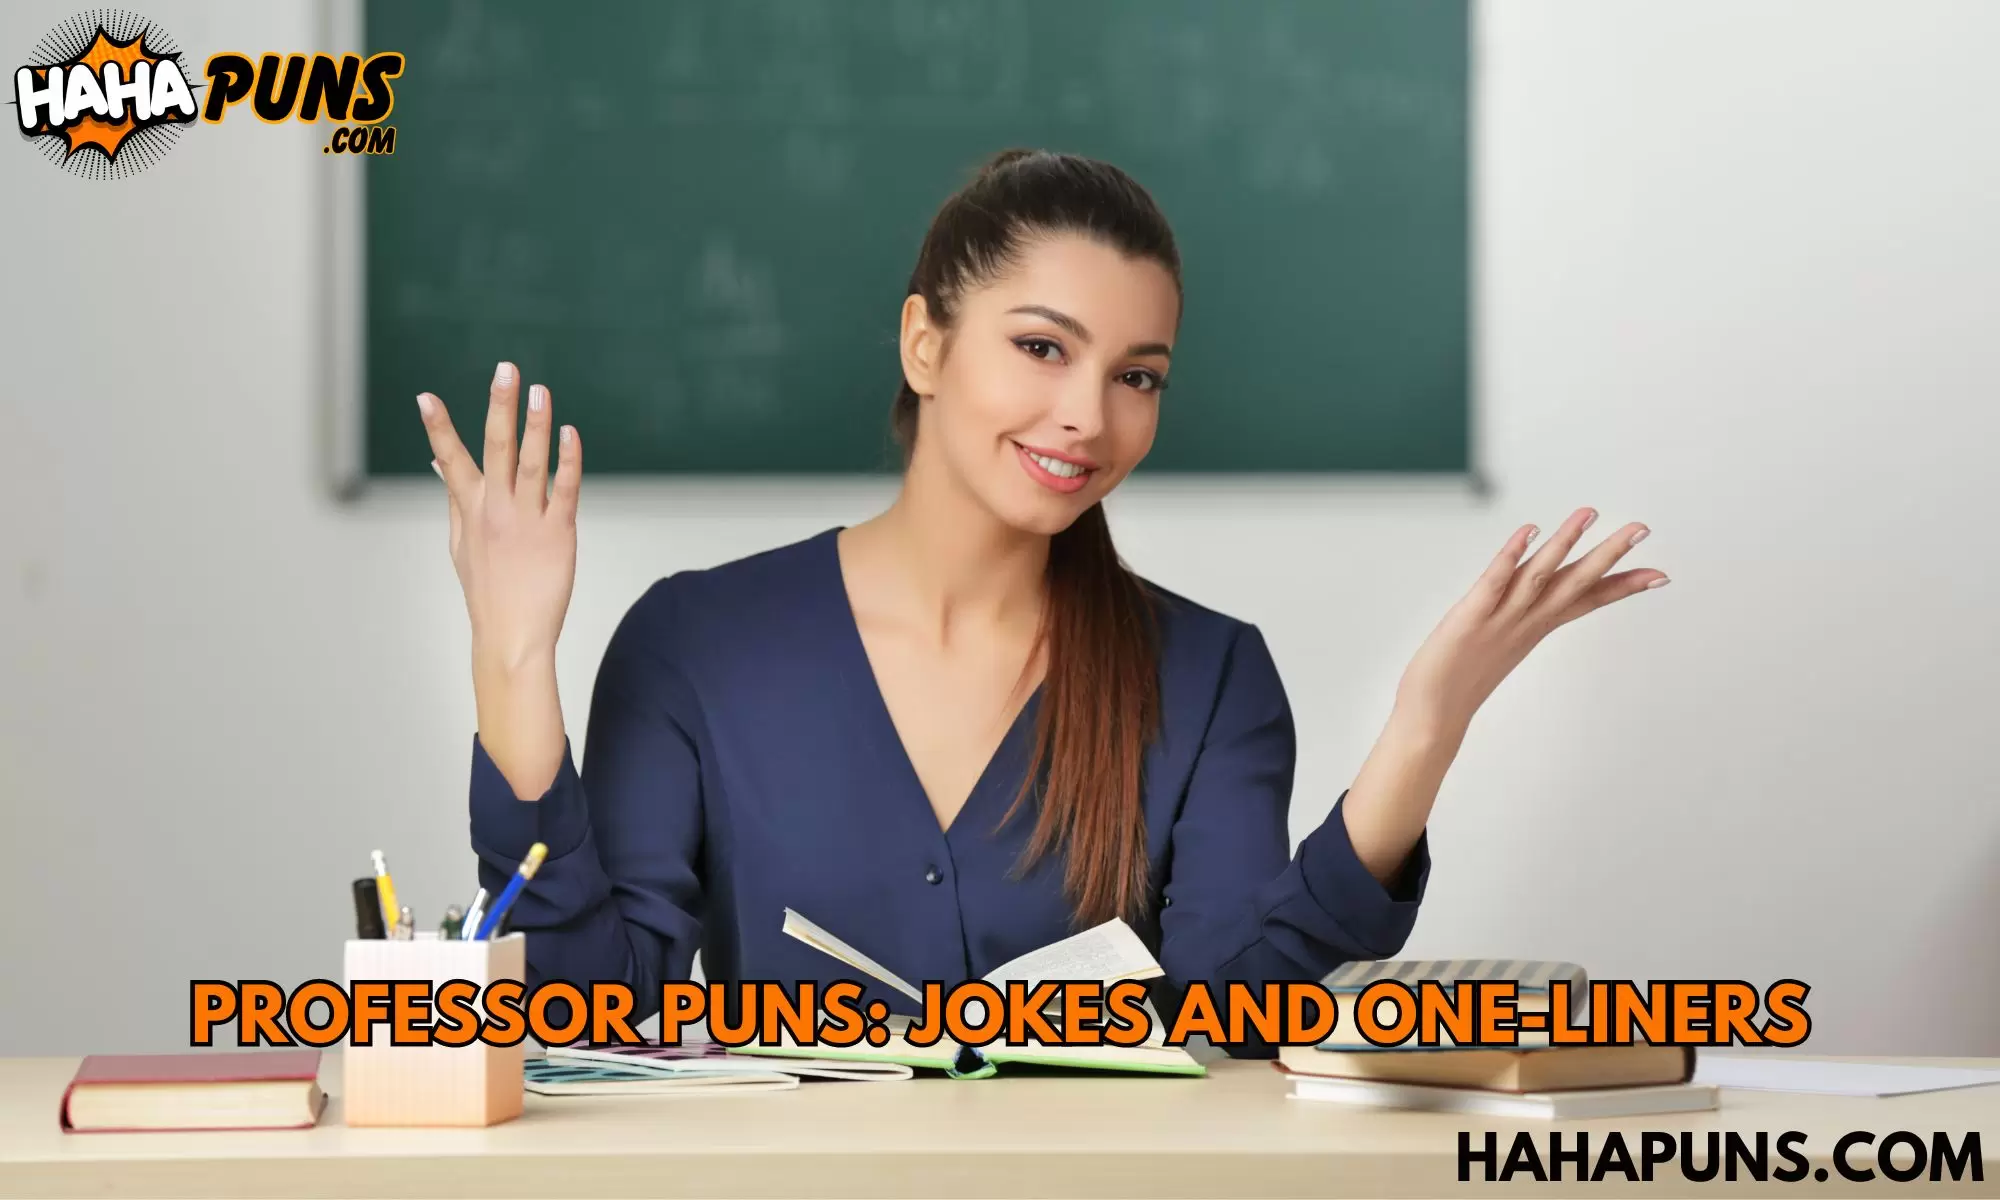 Professor Puns: Jokes And One-Liners